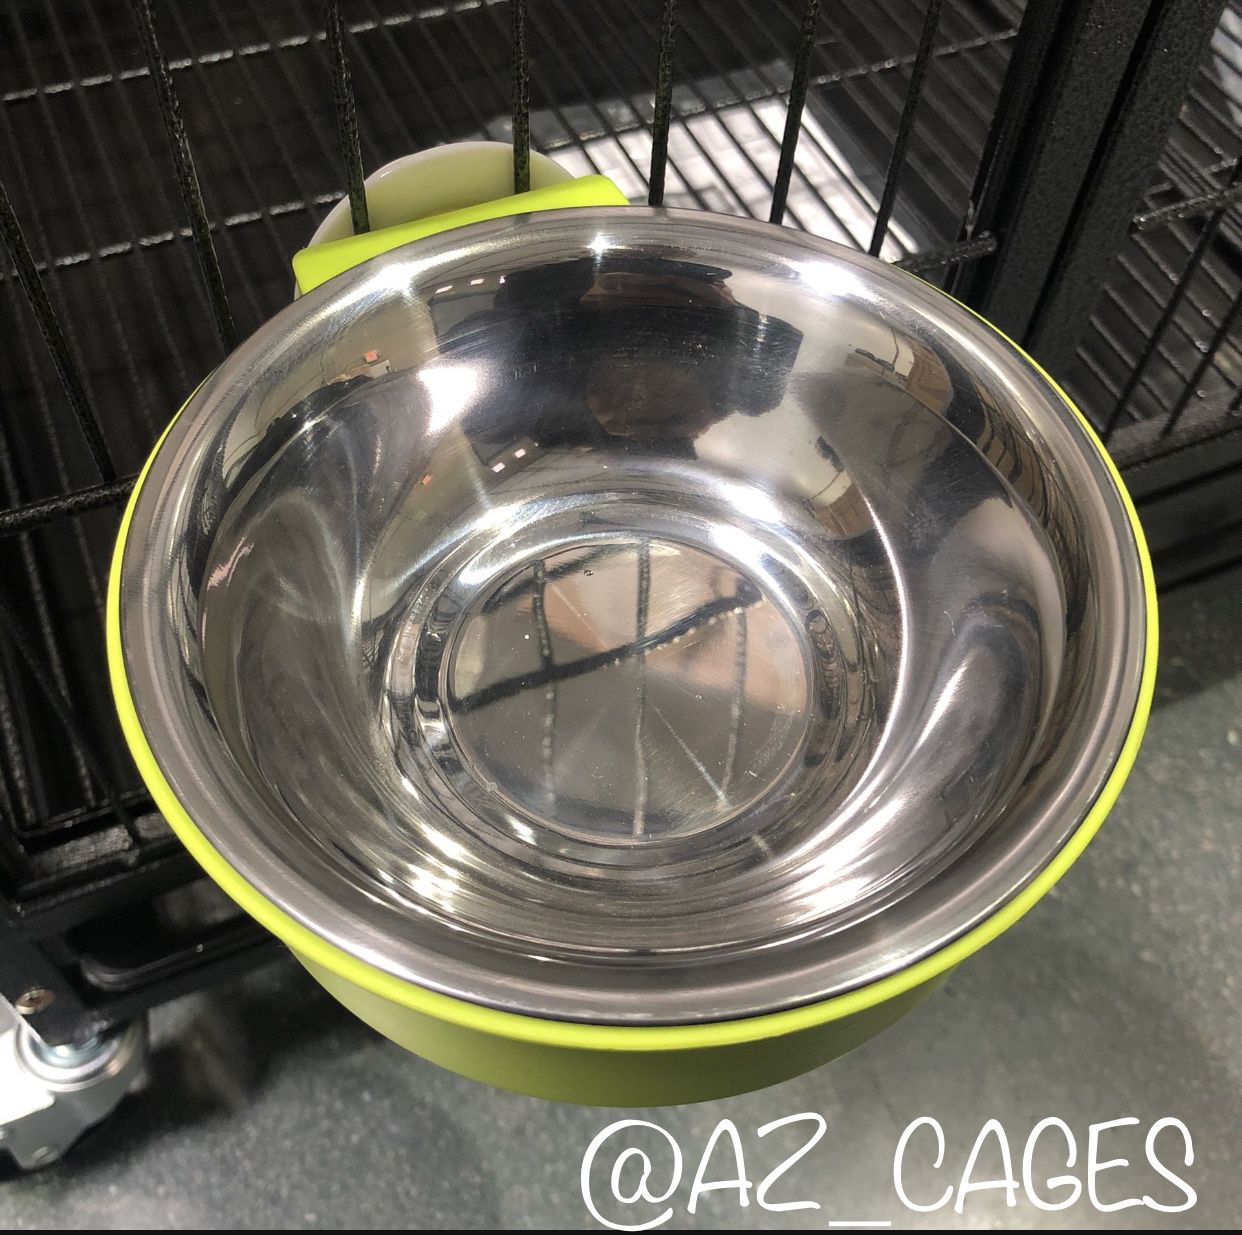 Brand New 37” Heavy Duty Dog Pet Kennel Crate Cage 🐕‍🦺🐩🐶 please see dimensions in second picture 🇺🇸 